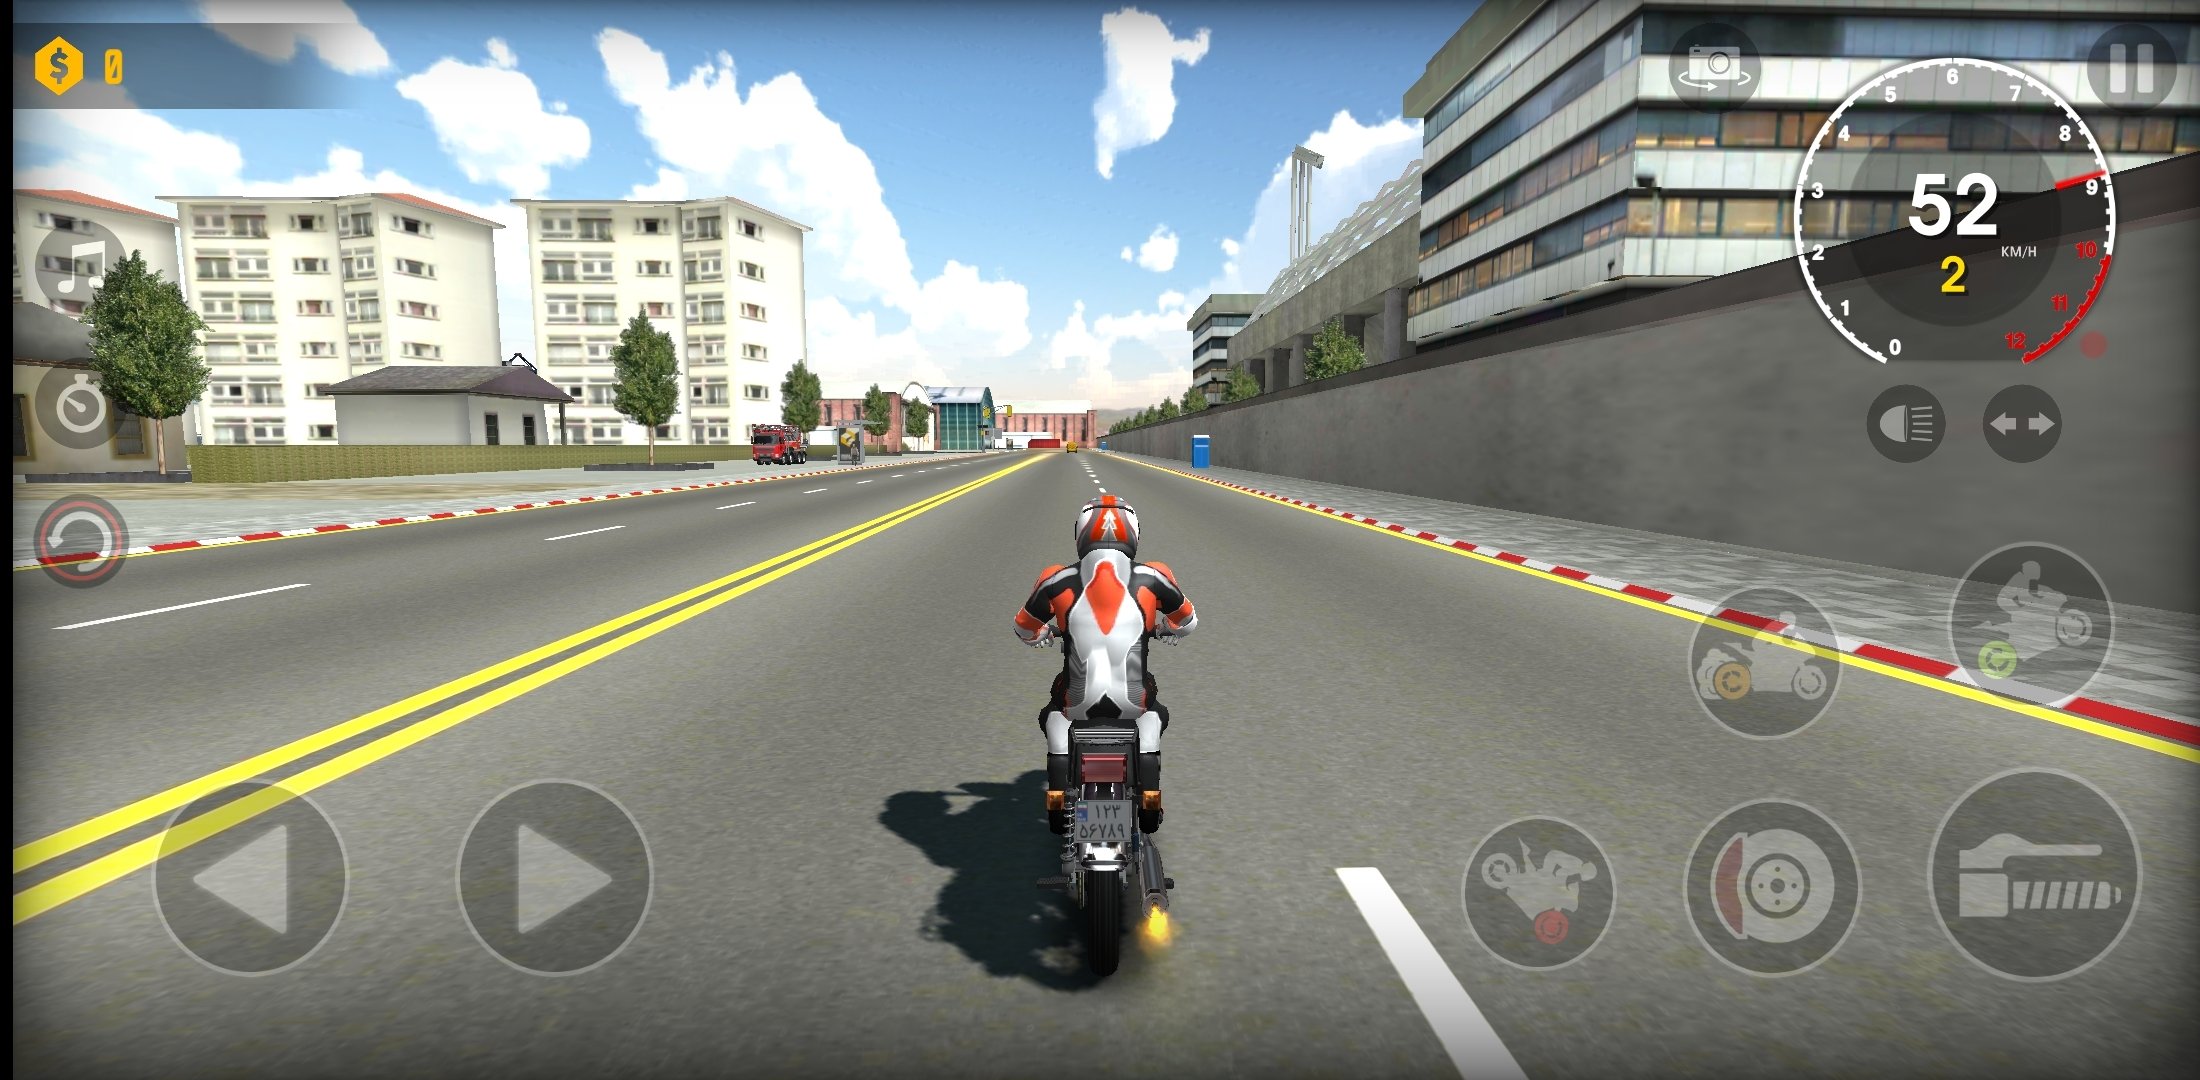 Xtreme Motorbikes APK for Android - Download